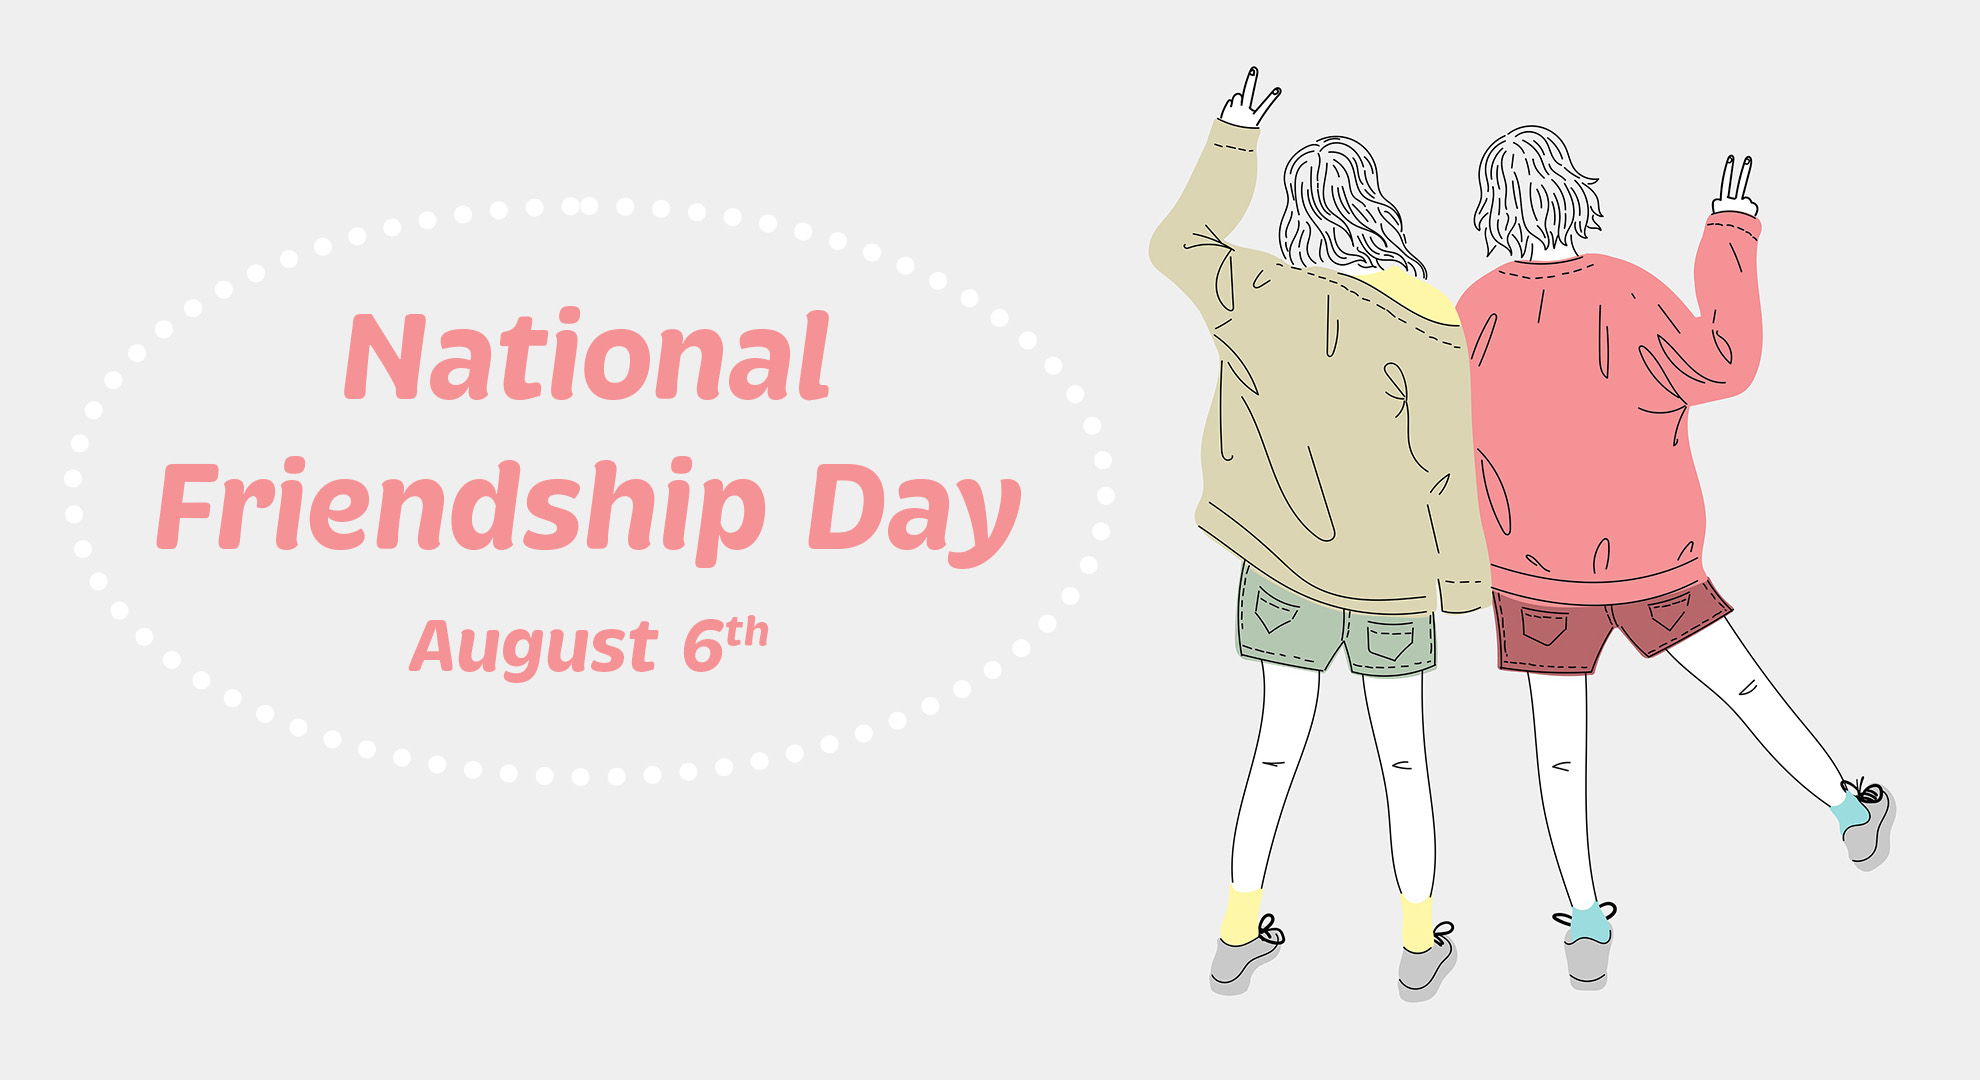 Graphic has a white dotted oval on the left side of the screen and inside the oval it reads National Friendship Day August 6th. This text is in a salmon colored font. To the right of the screen it shows the back view of 2 people holding their hands in the air with peace signs.